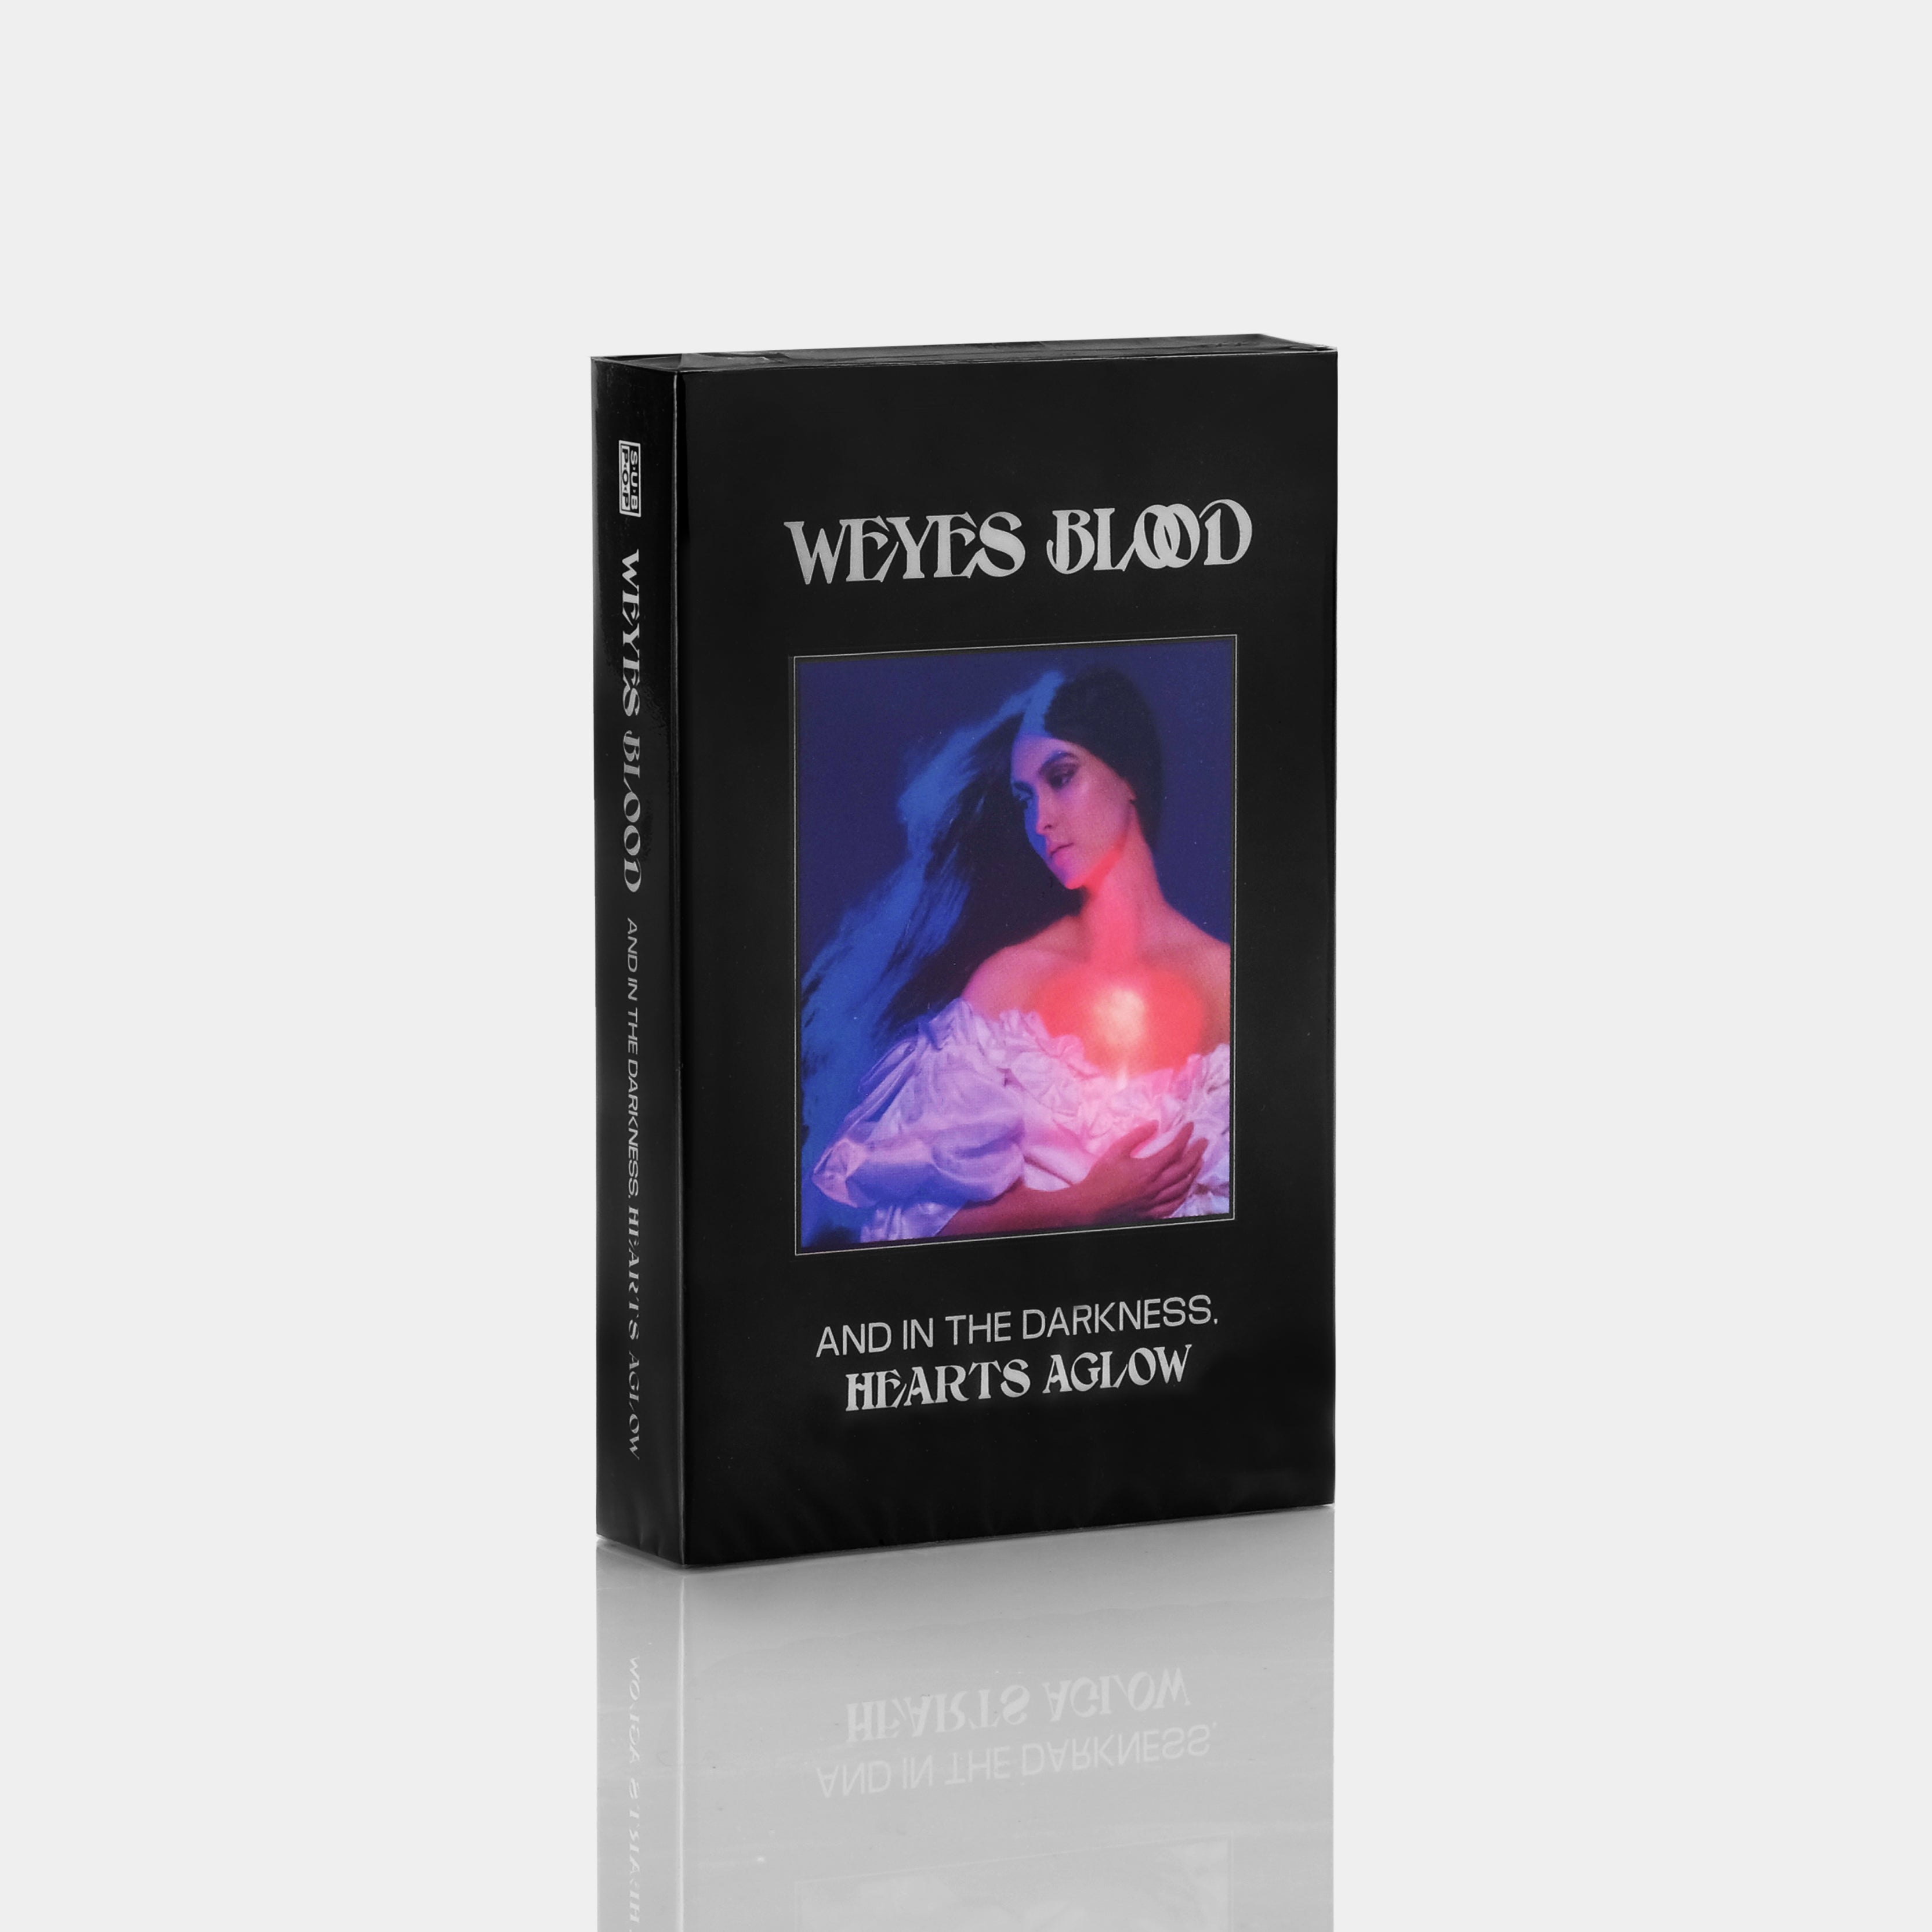 Weyes Blood - And In The Darkness, Hearts Aglow Cassette Tape